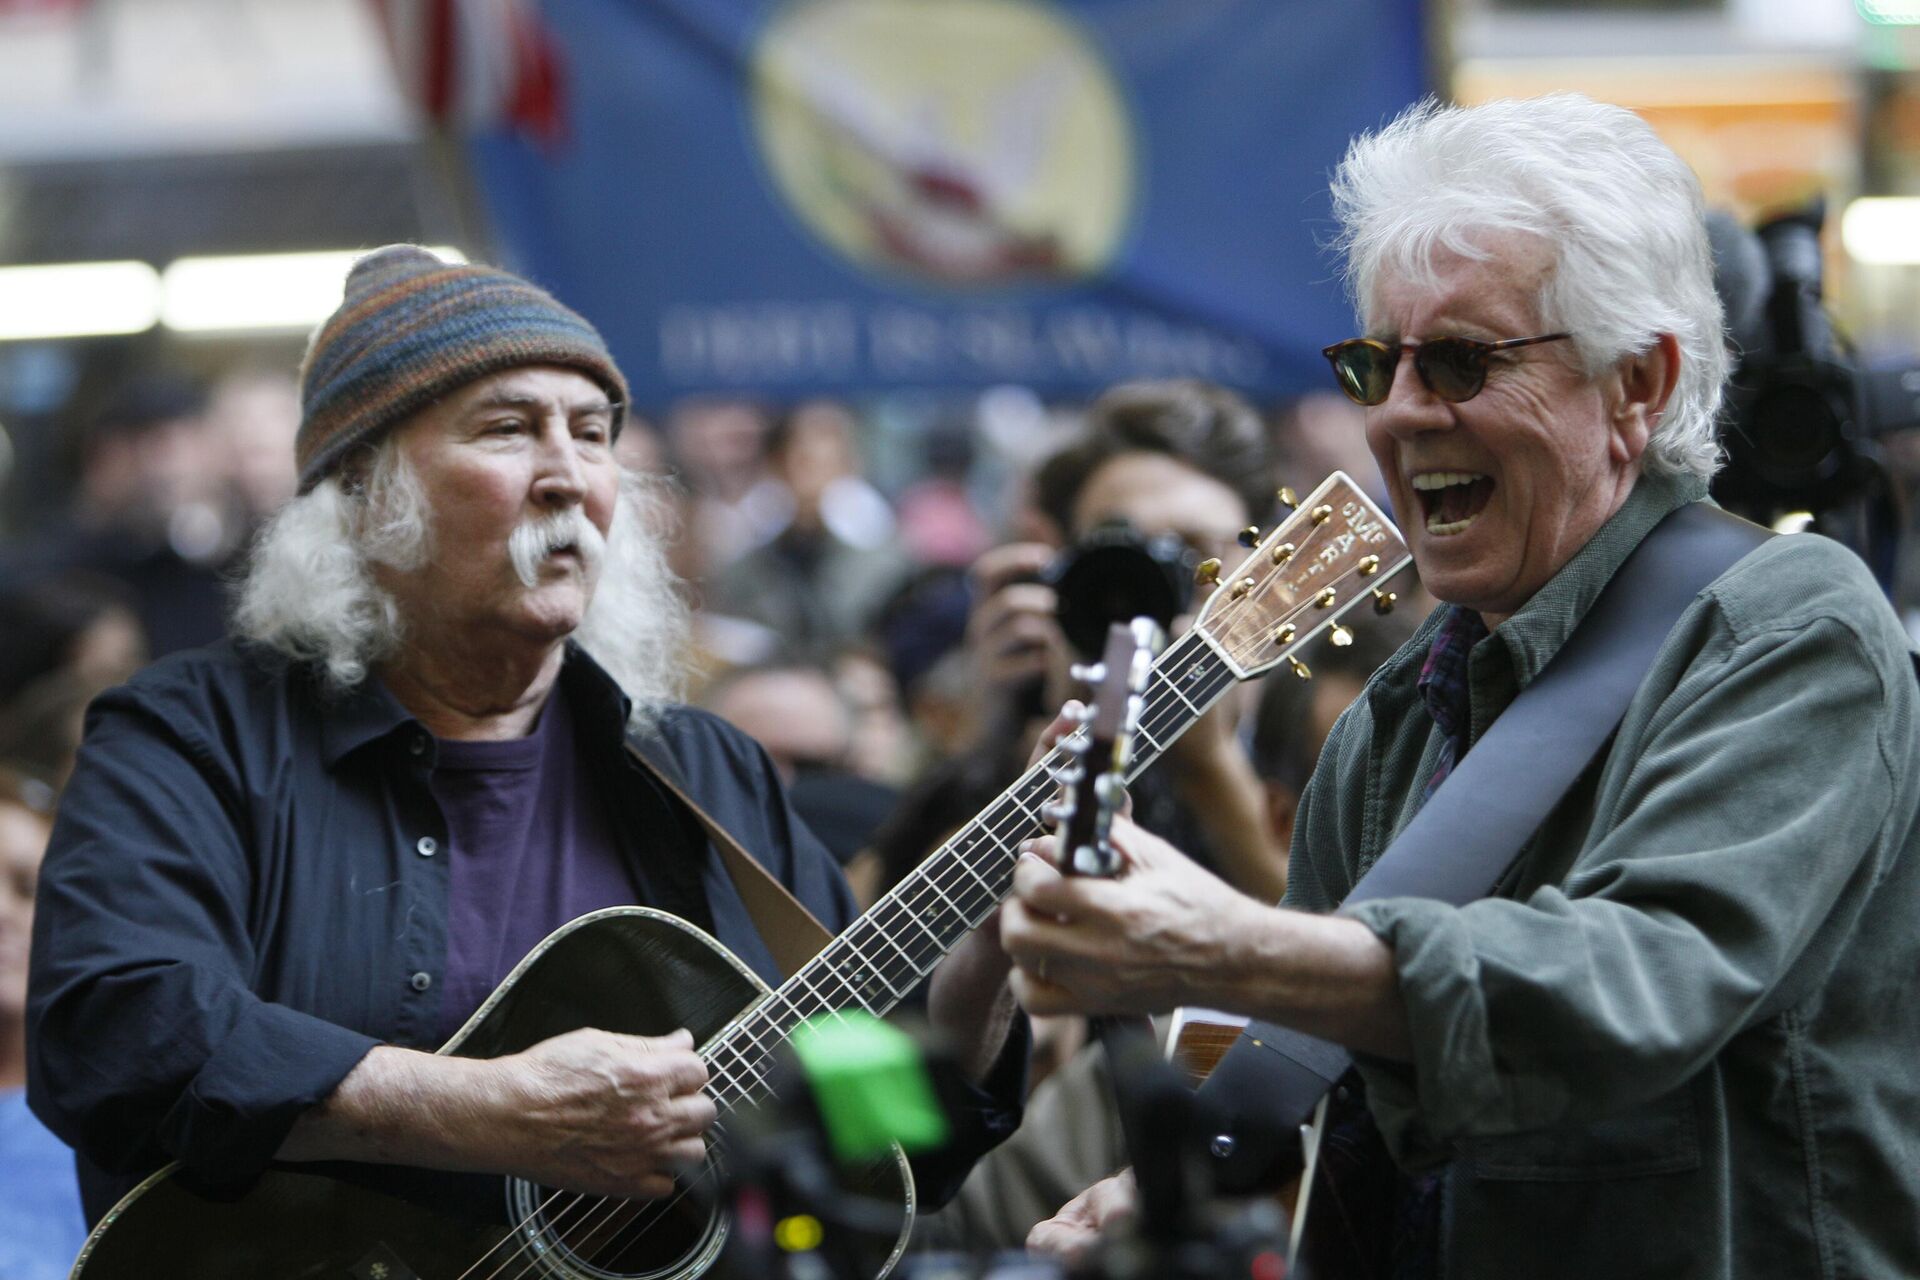 FILE - In this Nov. 8, 2011 file photo, singers David Crosby, left, and Graham Nash perform at the Occupy Wall Street encampment at Zuccotti Park in New York. Music is woven into the fabric of Occupy Wall Street, much like when civil rights protesters sang We Shall Overcome or 1960s demonstrators heard Blowin' in the Wind or Give Peace a Chance. Crosby and Nash's manager sent an email to Occupy Wall Street's website asking if the musicians could perform.  - Sputnik International, 1920, 20.01.2023